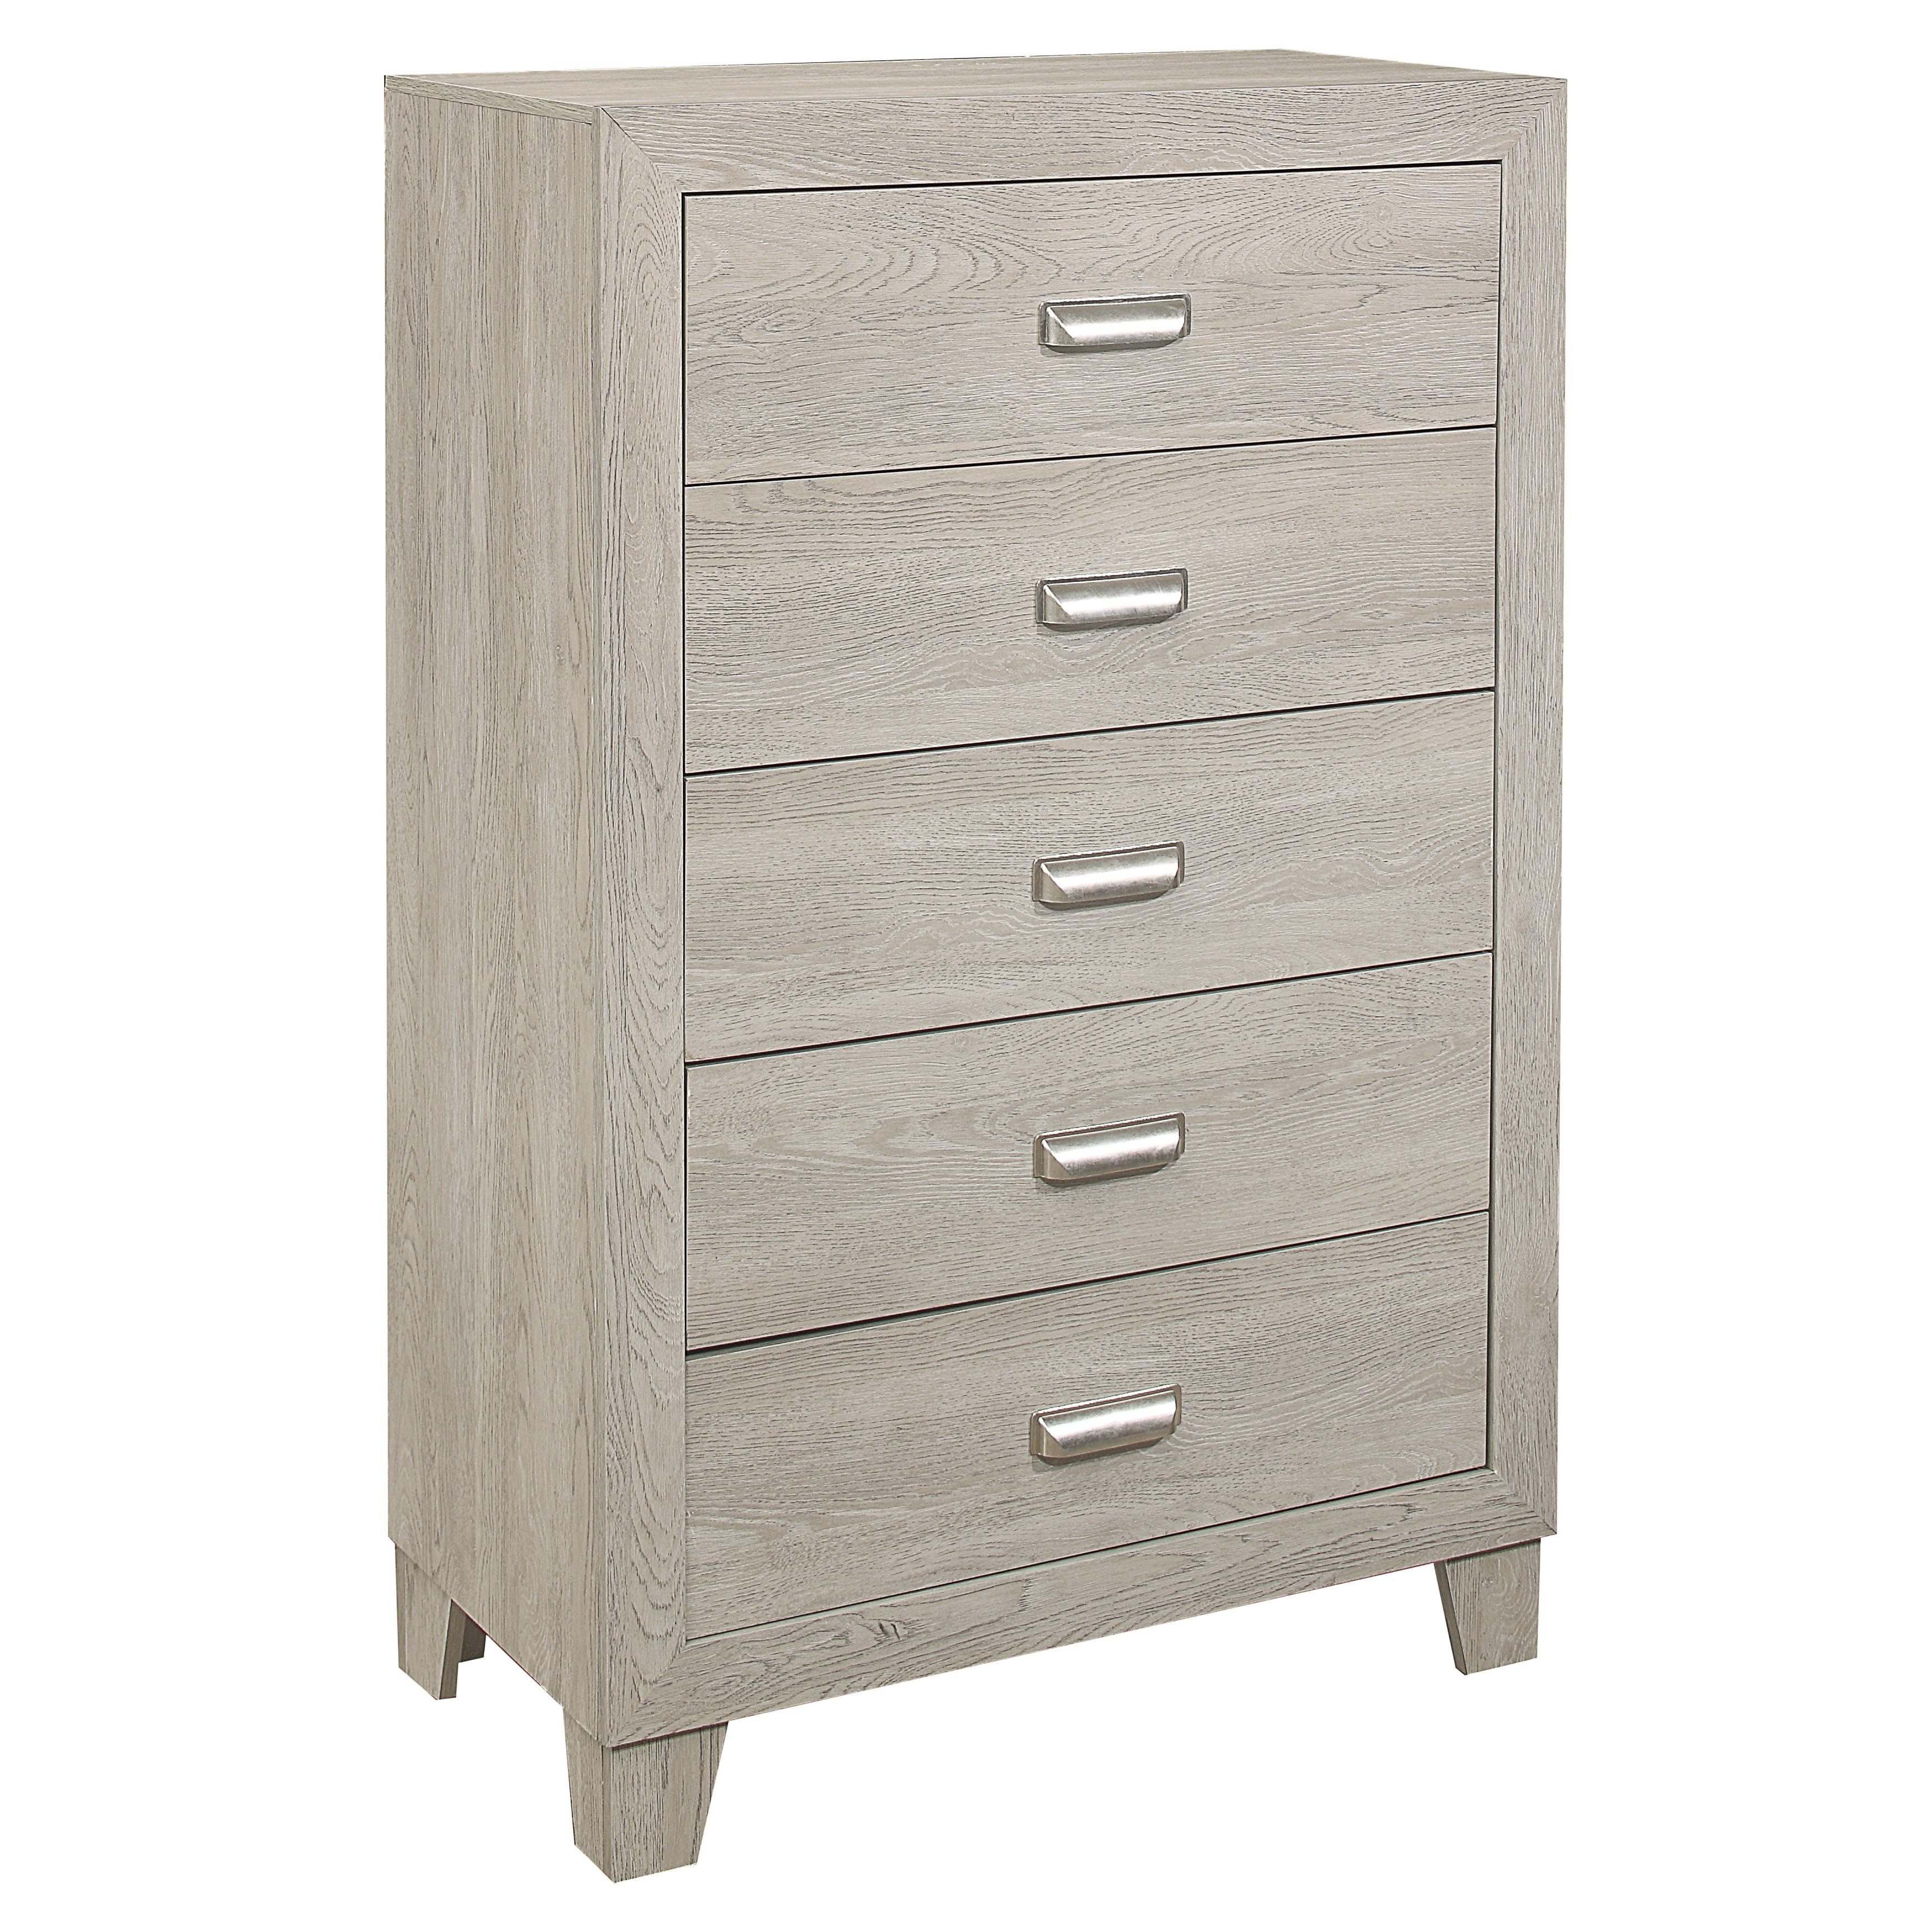 Modern Chest 1525-9 Quinby 1525-9 in Light Brown 